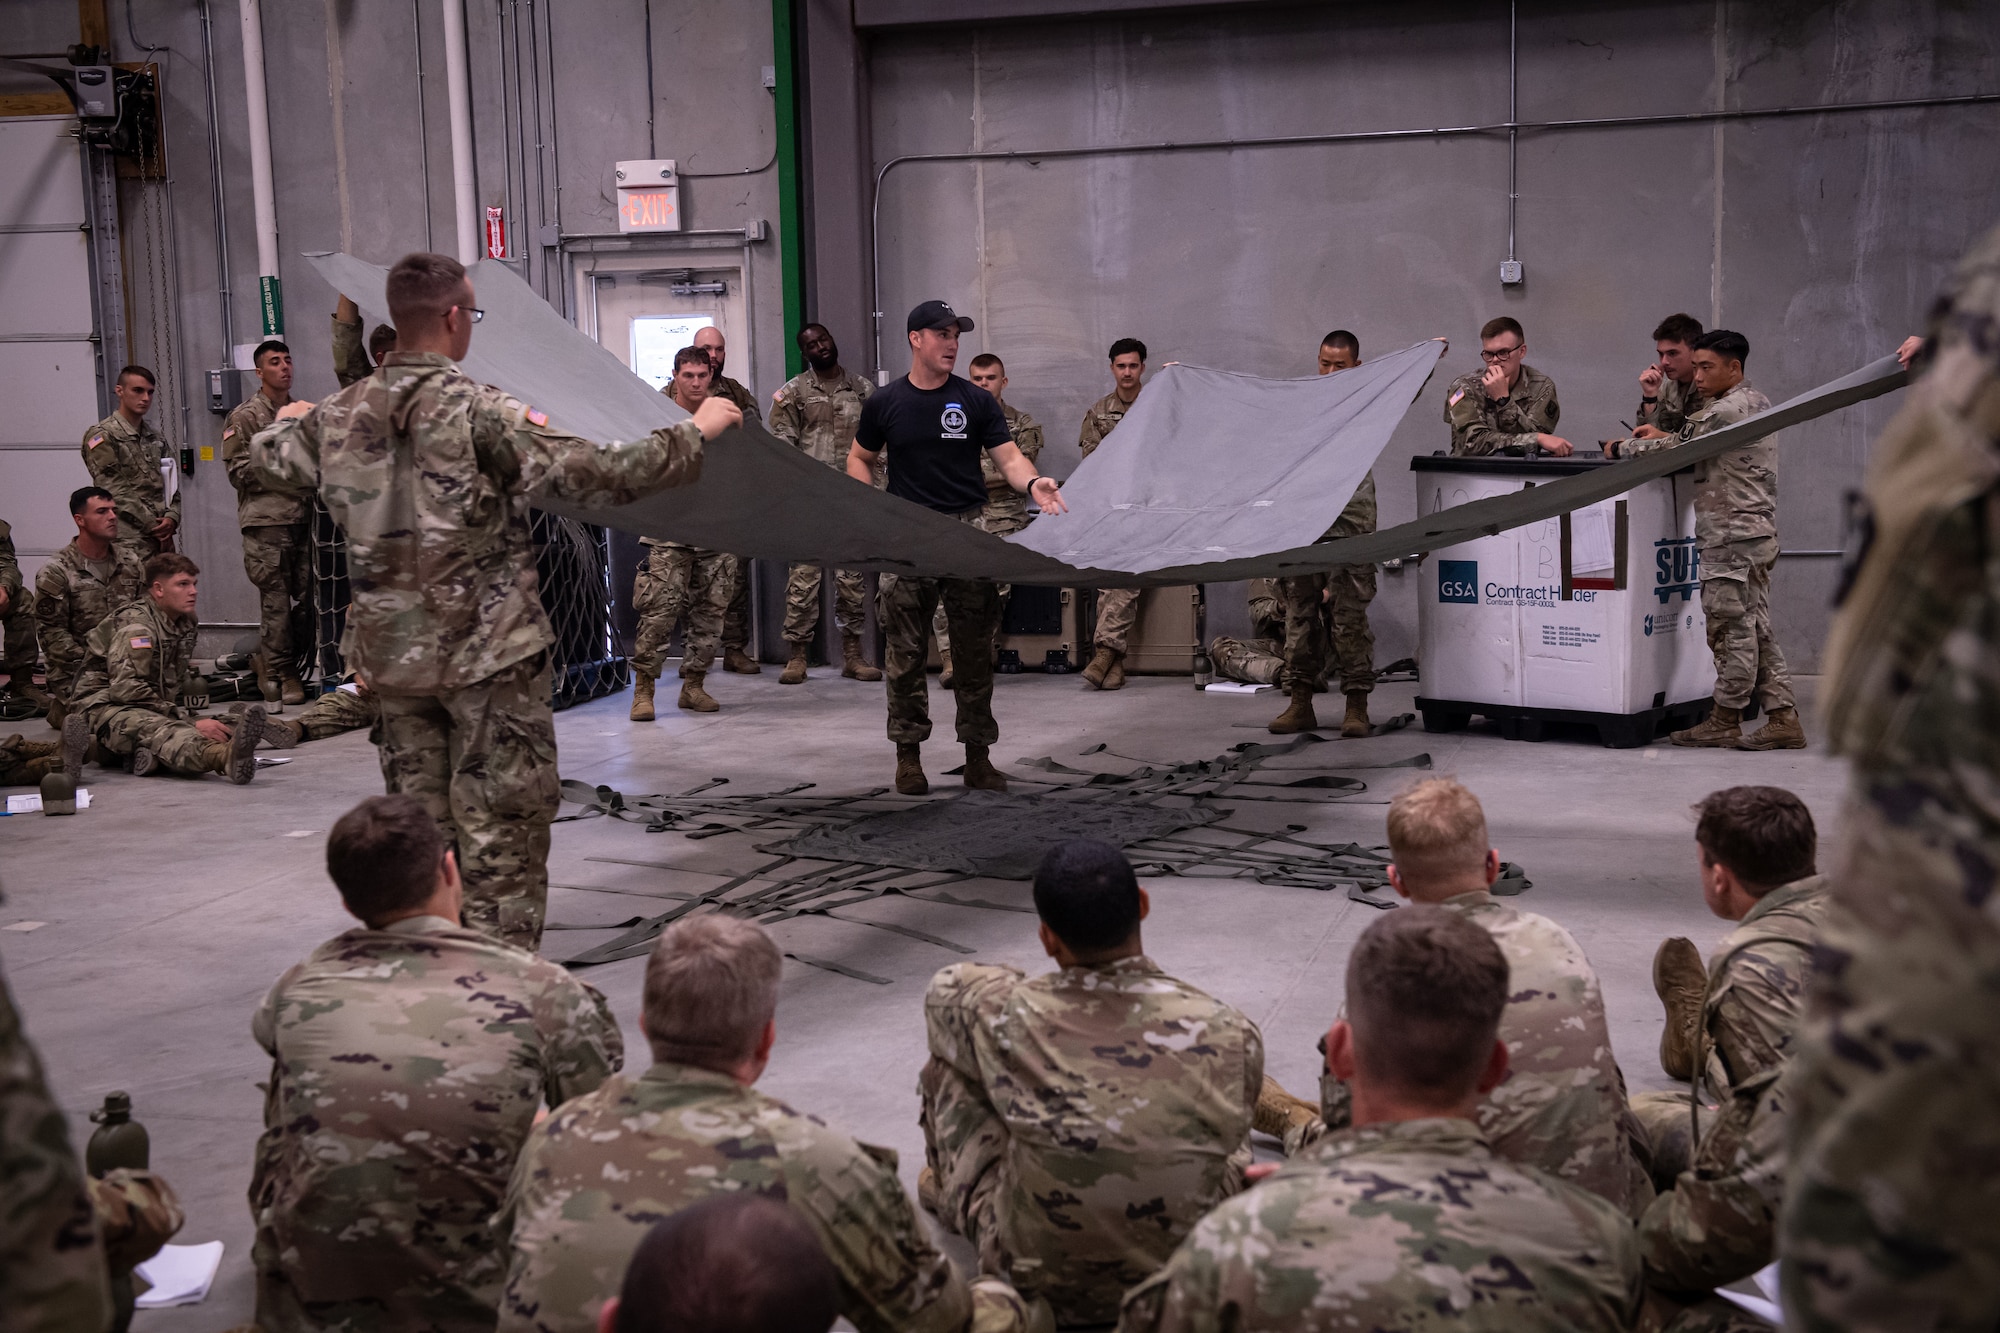 A U.S. Army Air Assault instructor teaches students the proper techniques on preparing equipment and supplies for sling load operations August 6, 2022, in Annville, Pennsylvania.